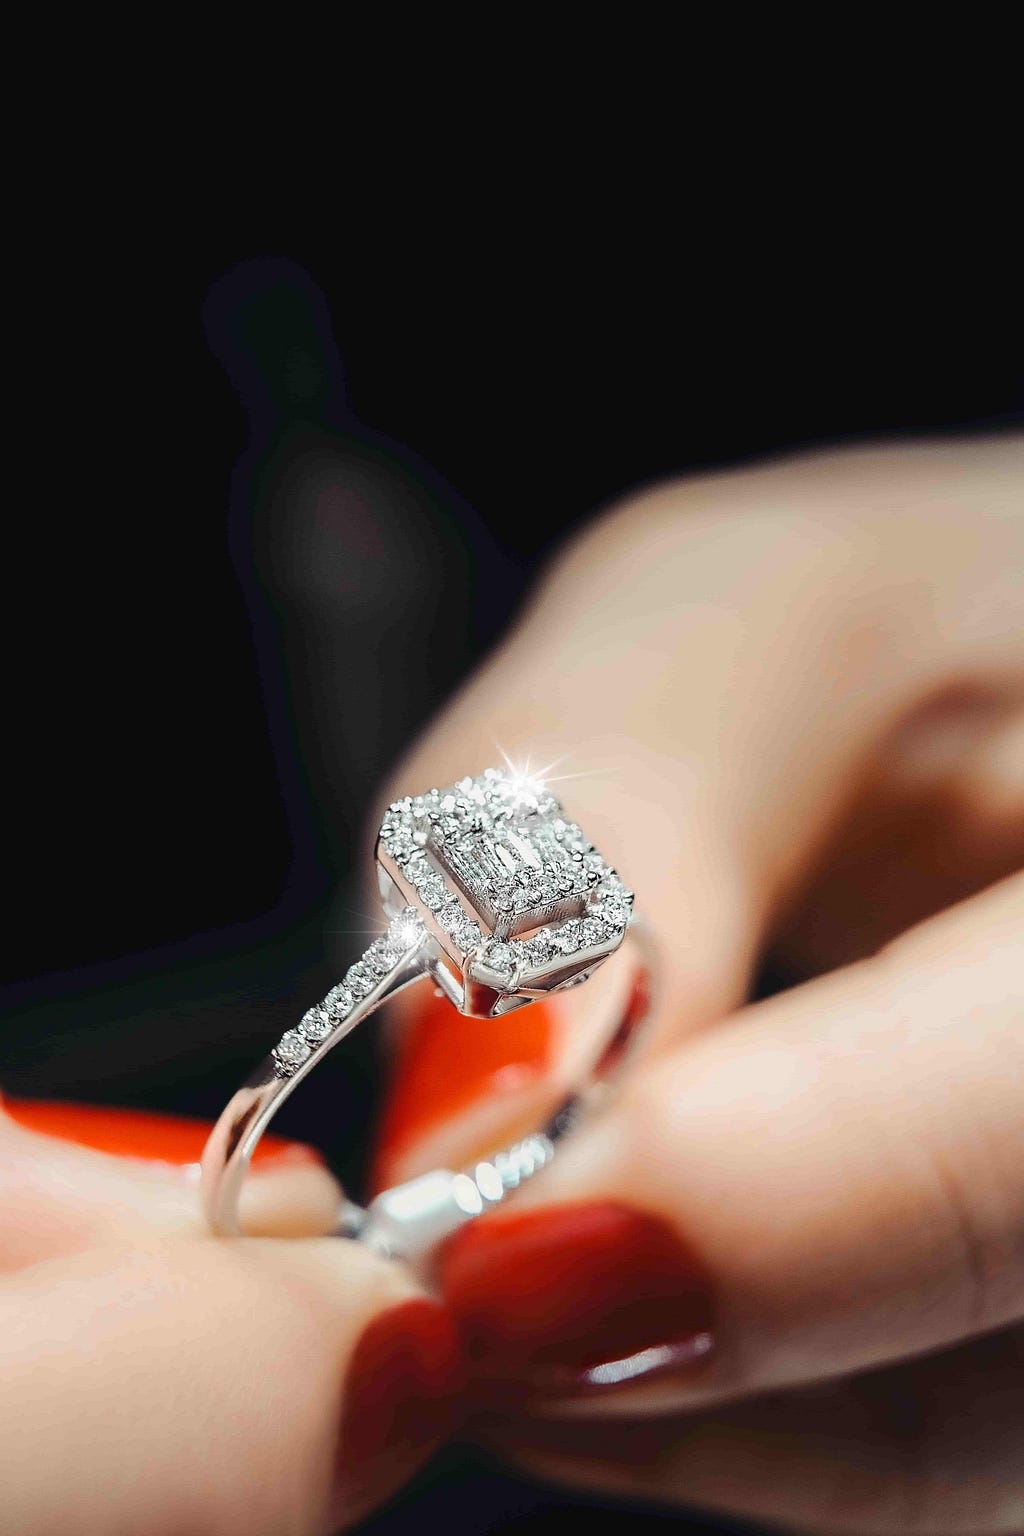 A woman holding a diamond engagement ring